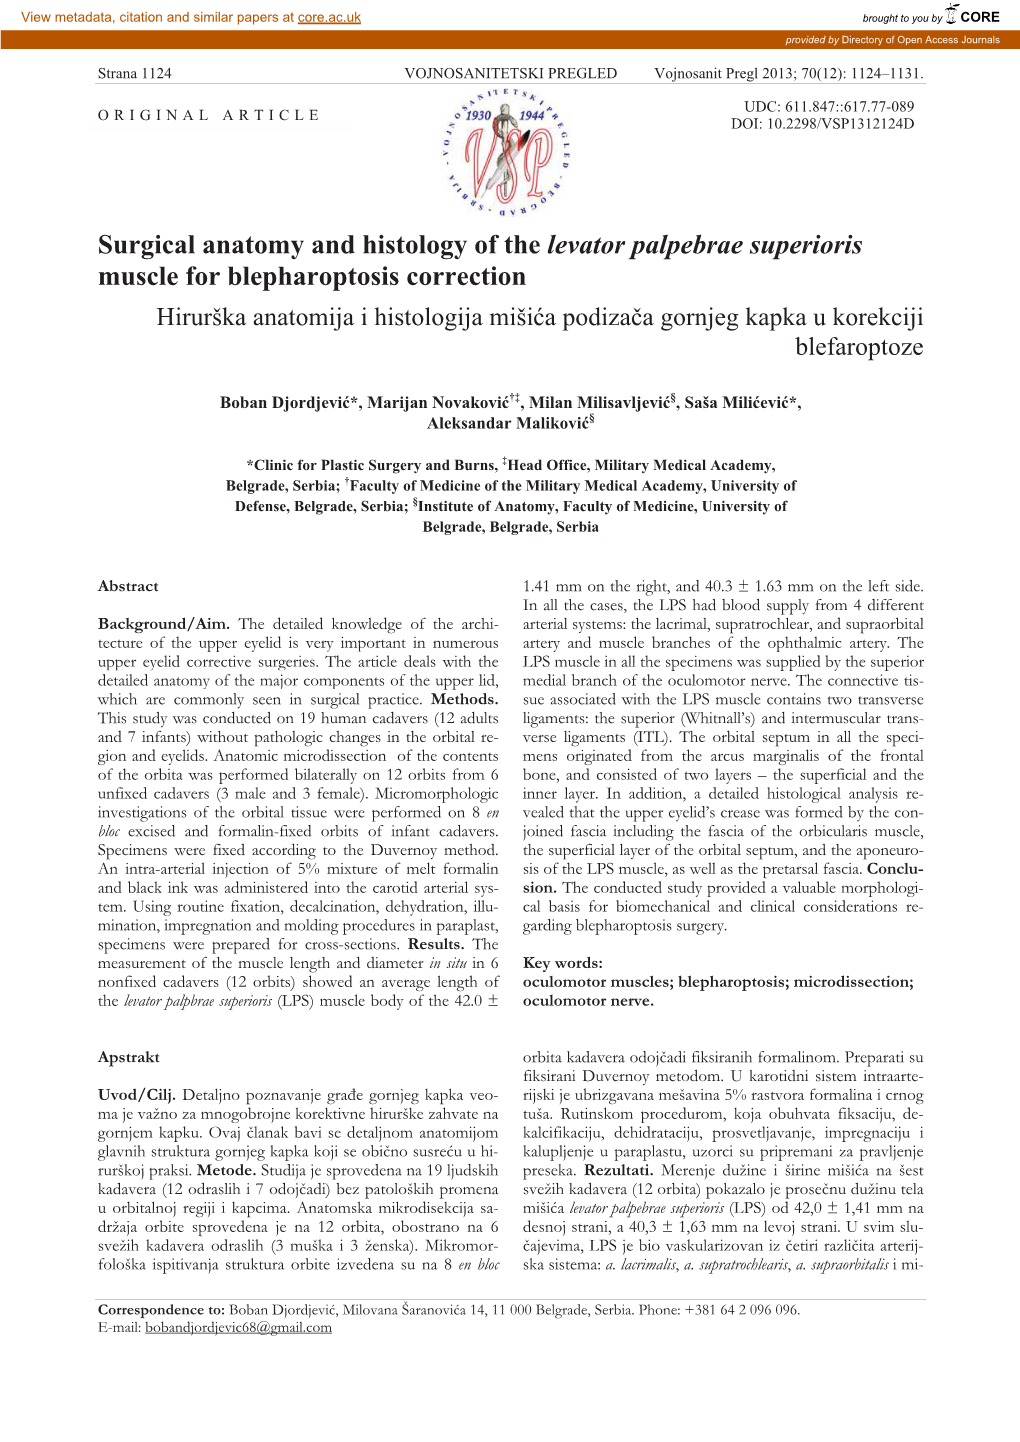 Surgical Anatomy and Histology of the Levator Palpebrae Superioris Muscle